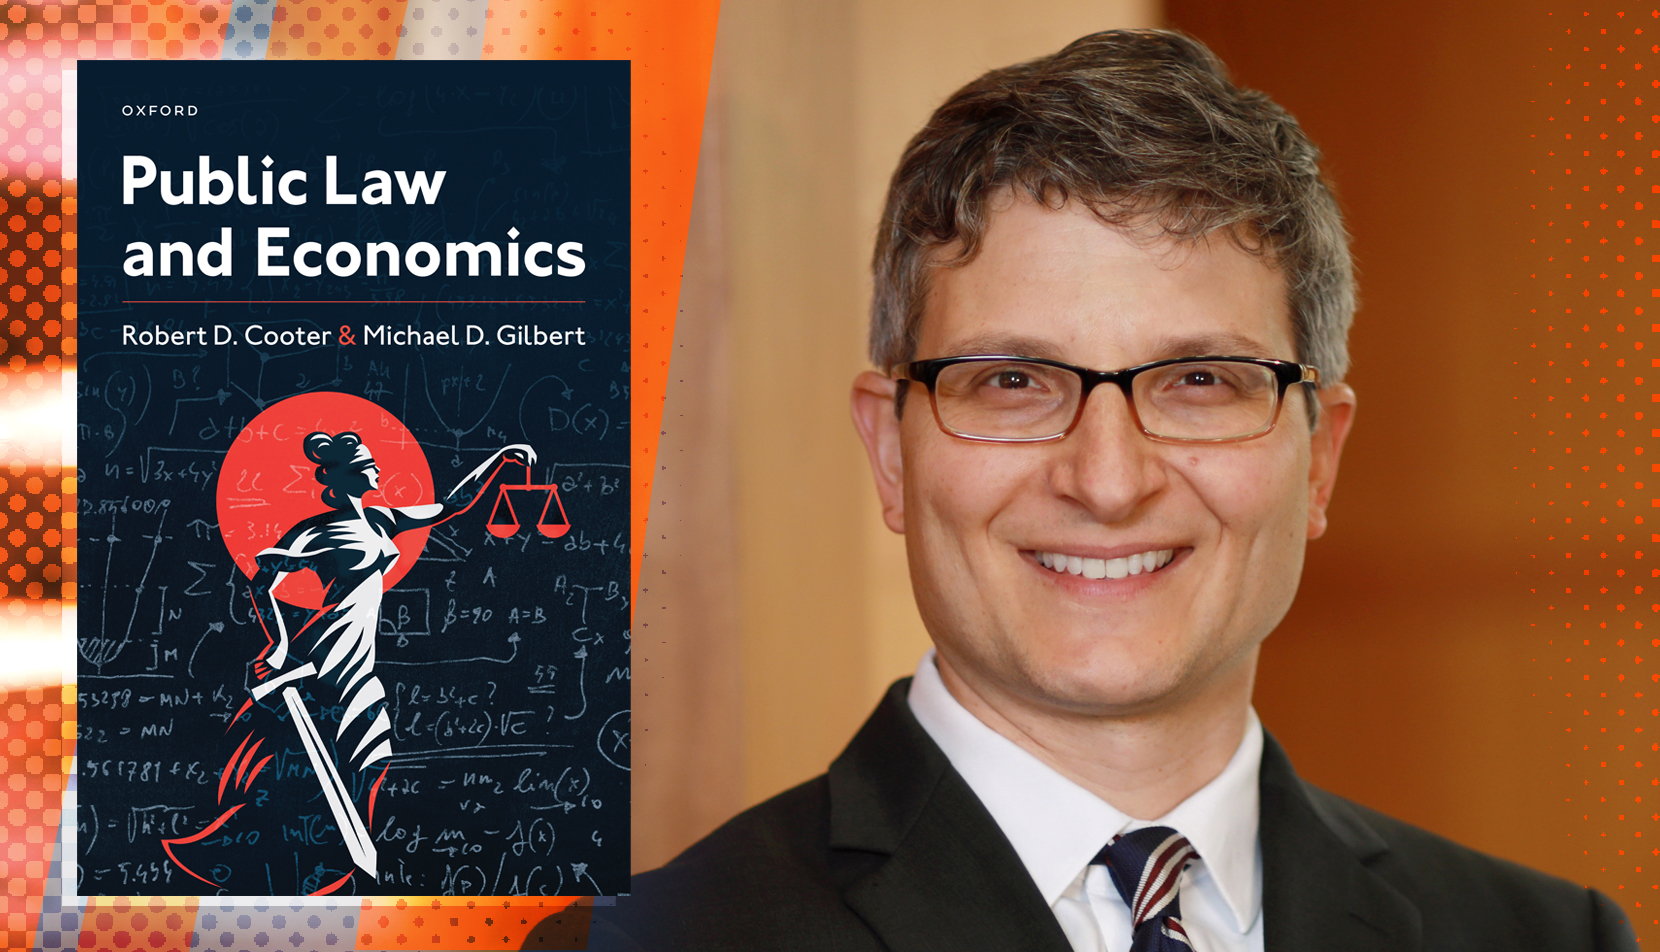 Michael Gilbert and "Public Law and Economics"